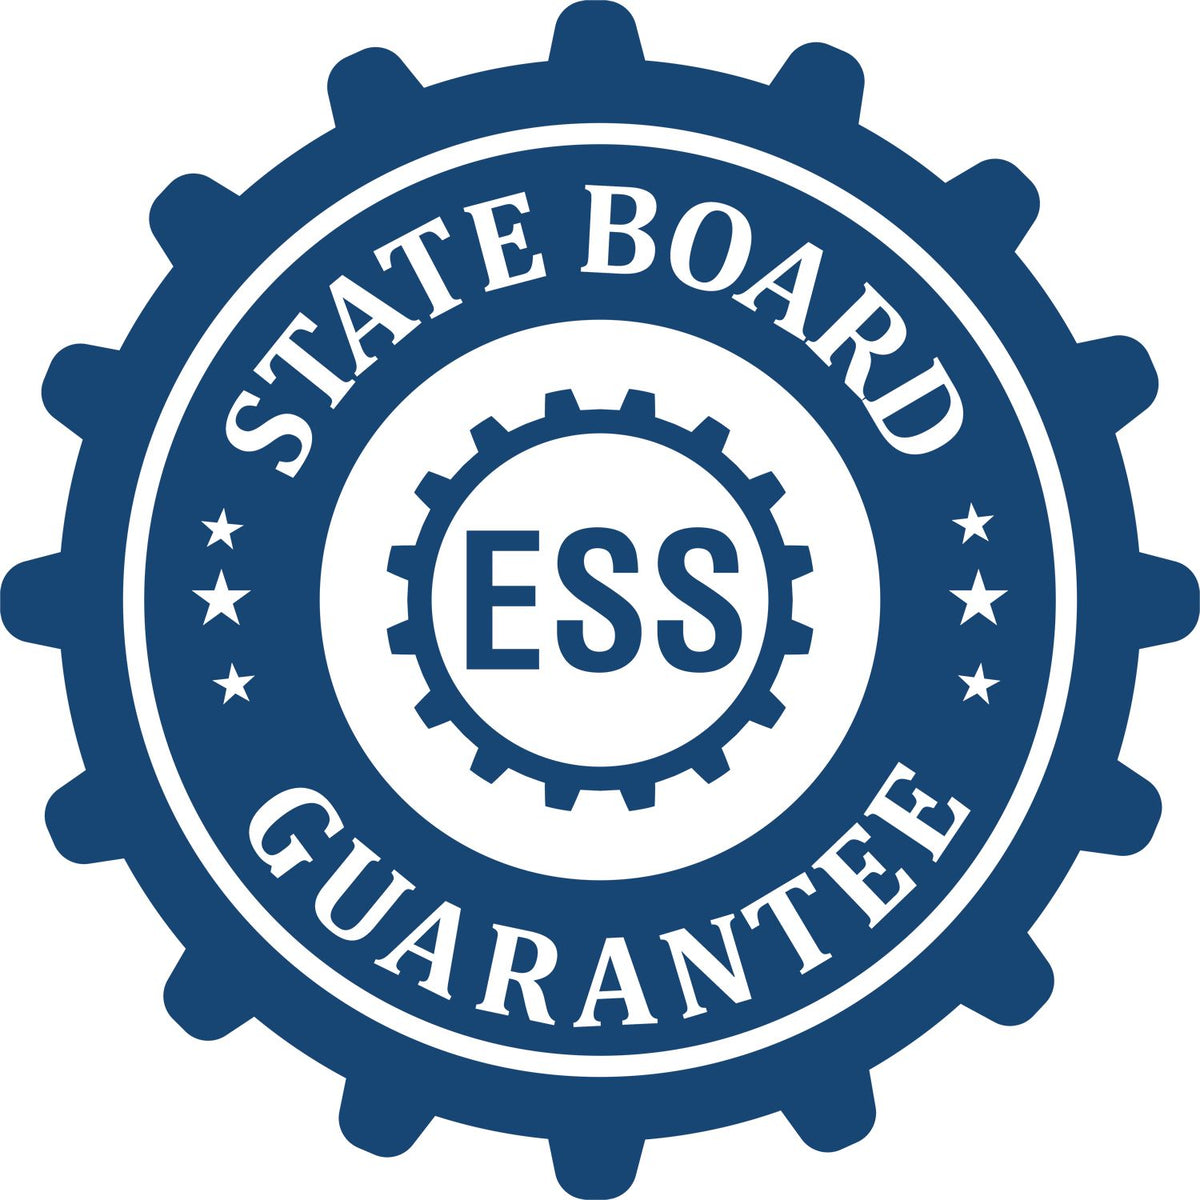 An emblem in a gear shape illustrating a state board guarantee for the State of Wyoming Long Reach Architectural Embossing Seal product.